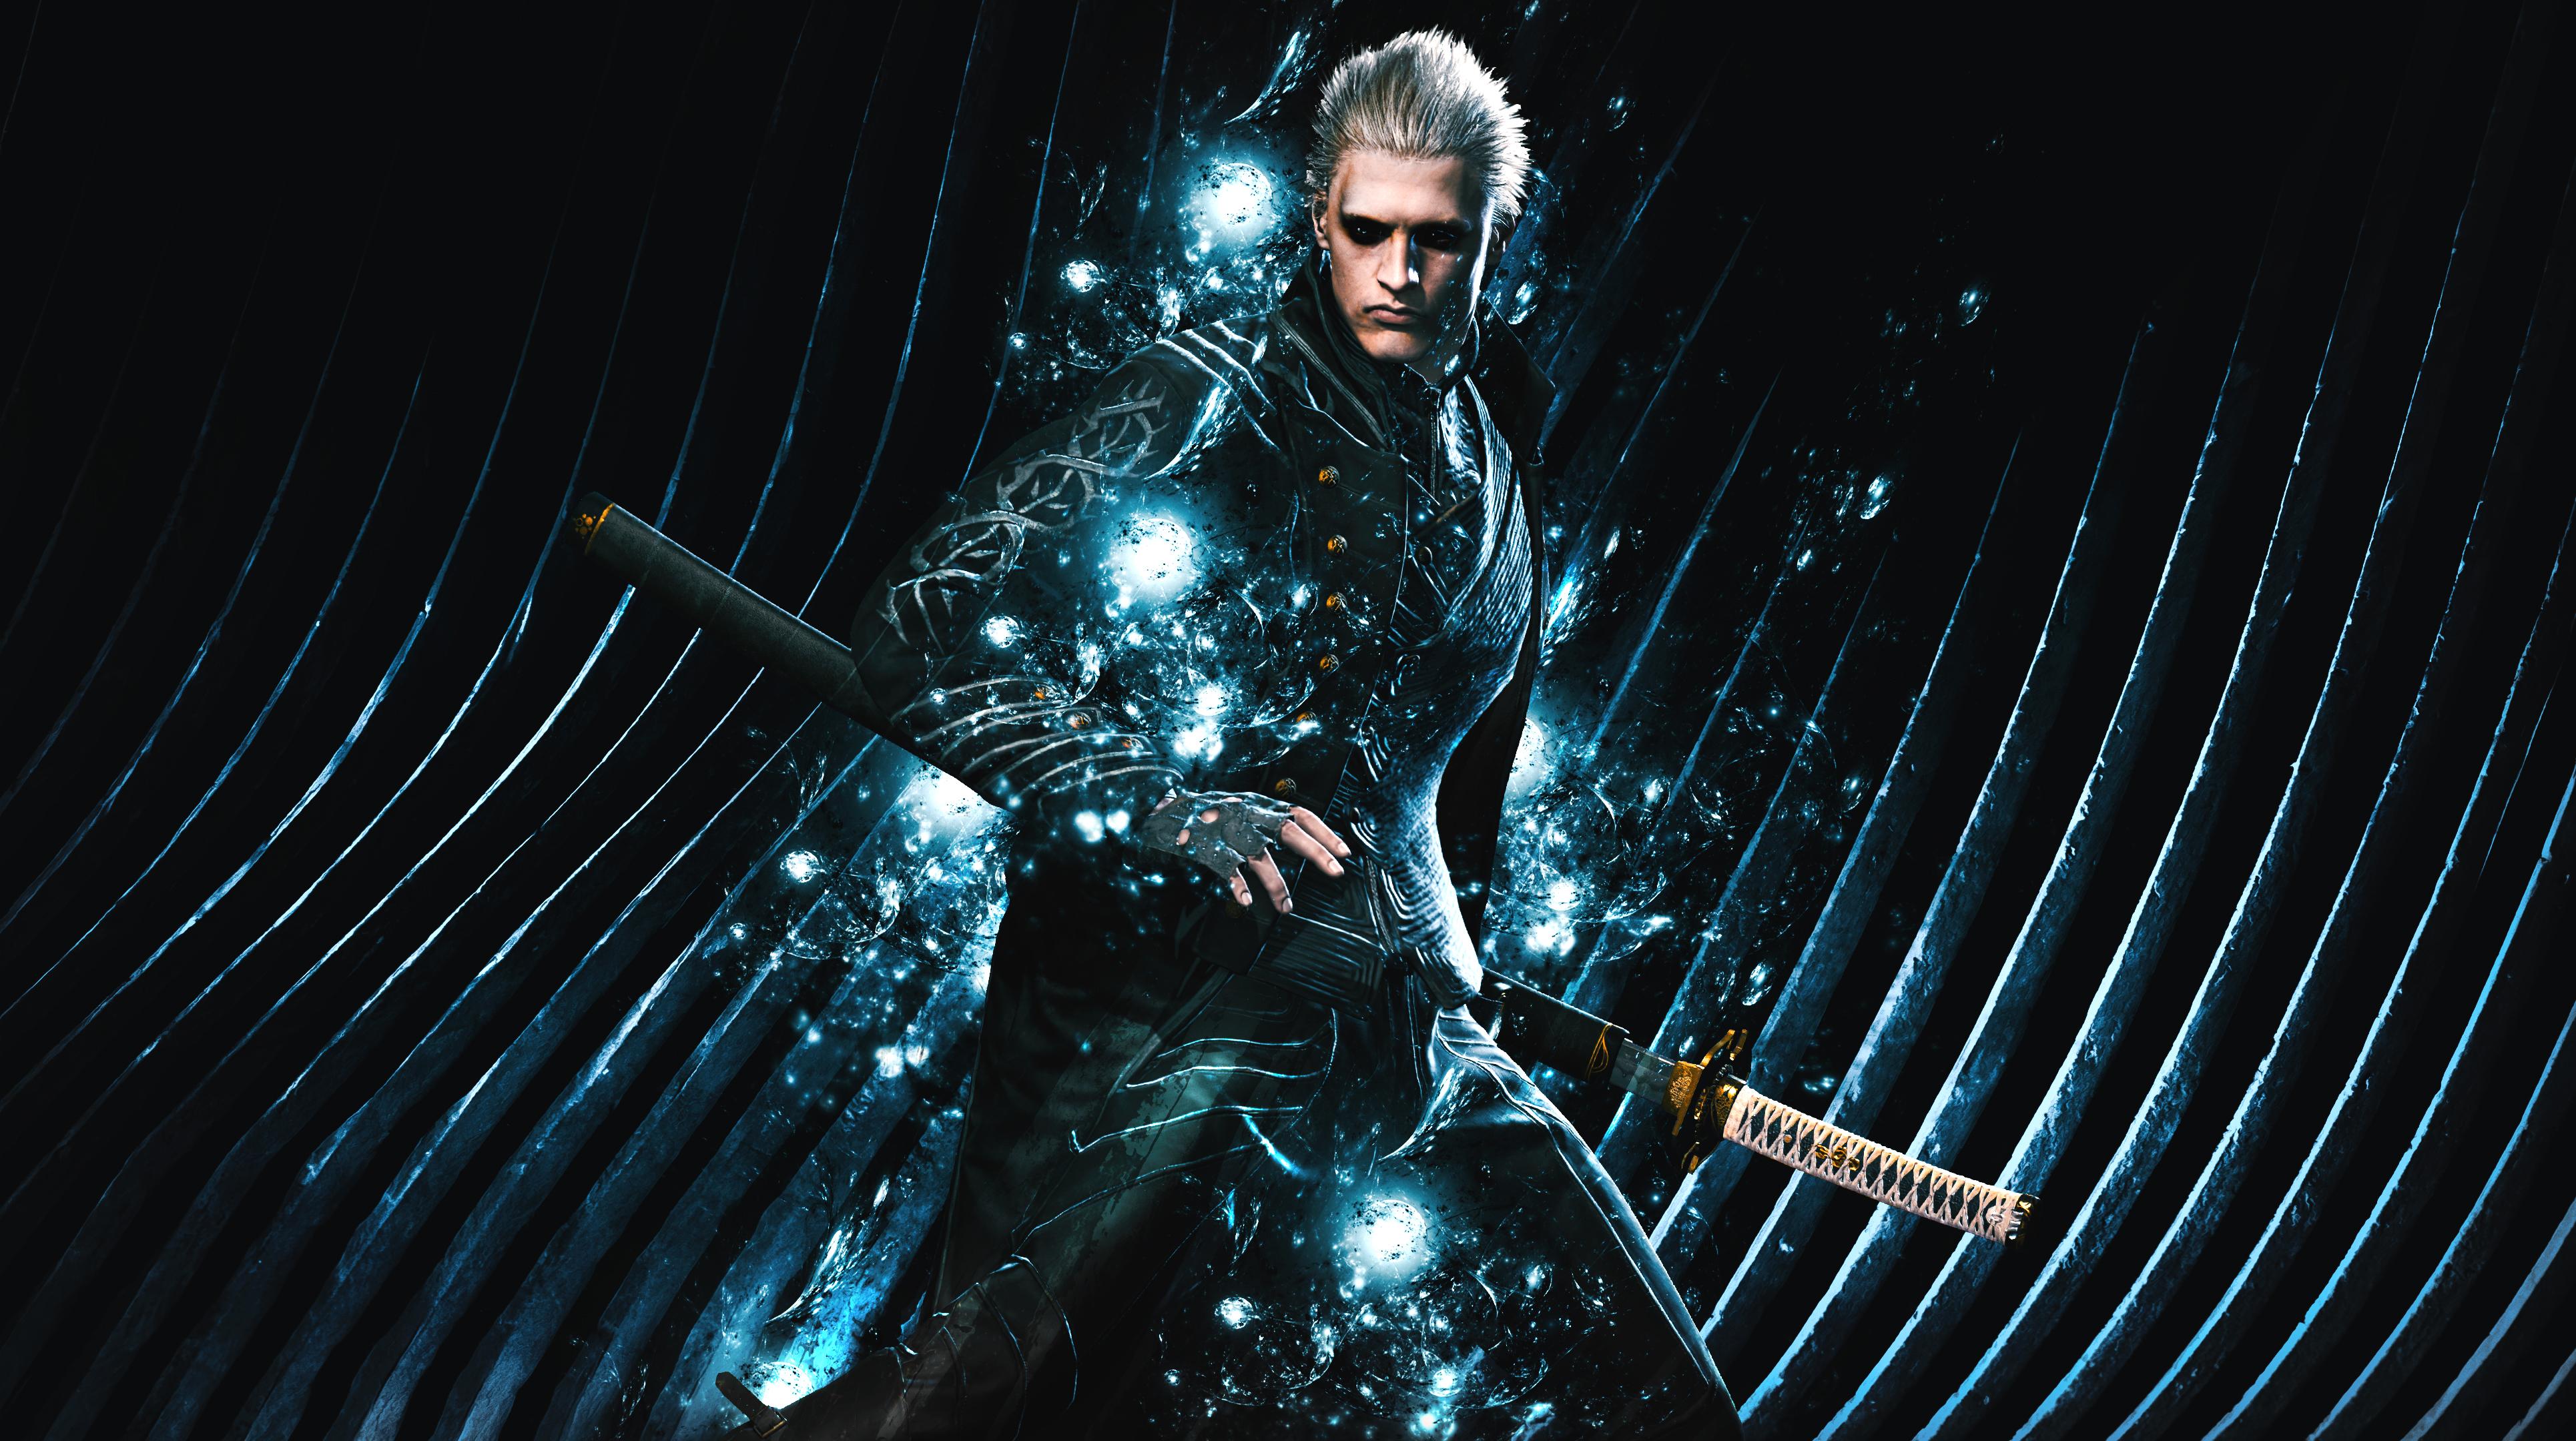 Devil May Cry Vergil Wallpapers Top Free Devil May Cry Vergil